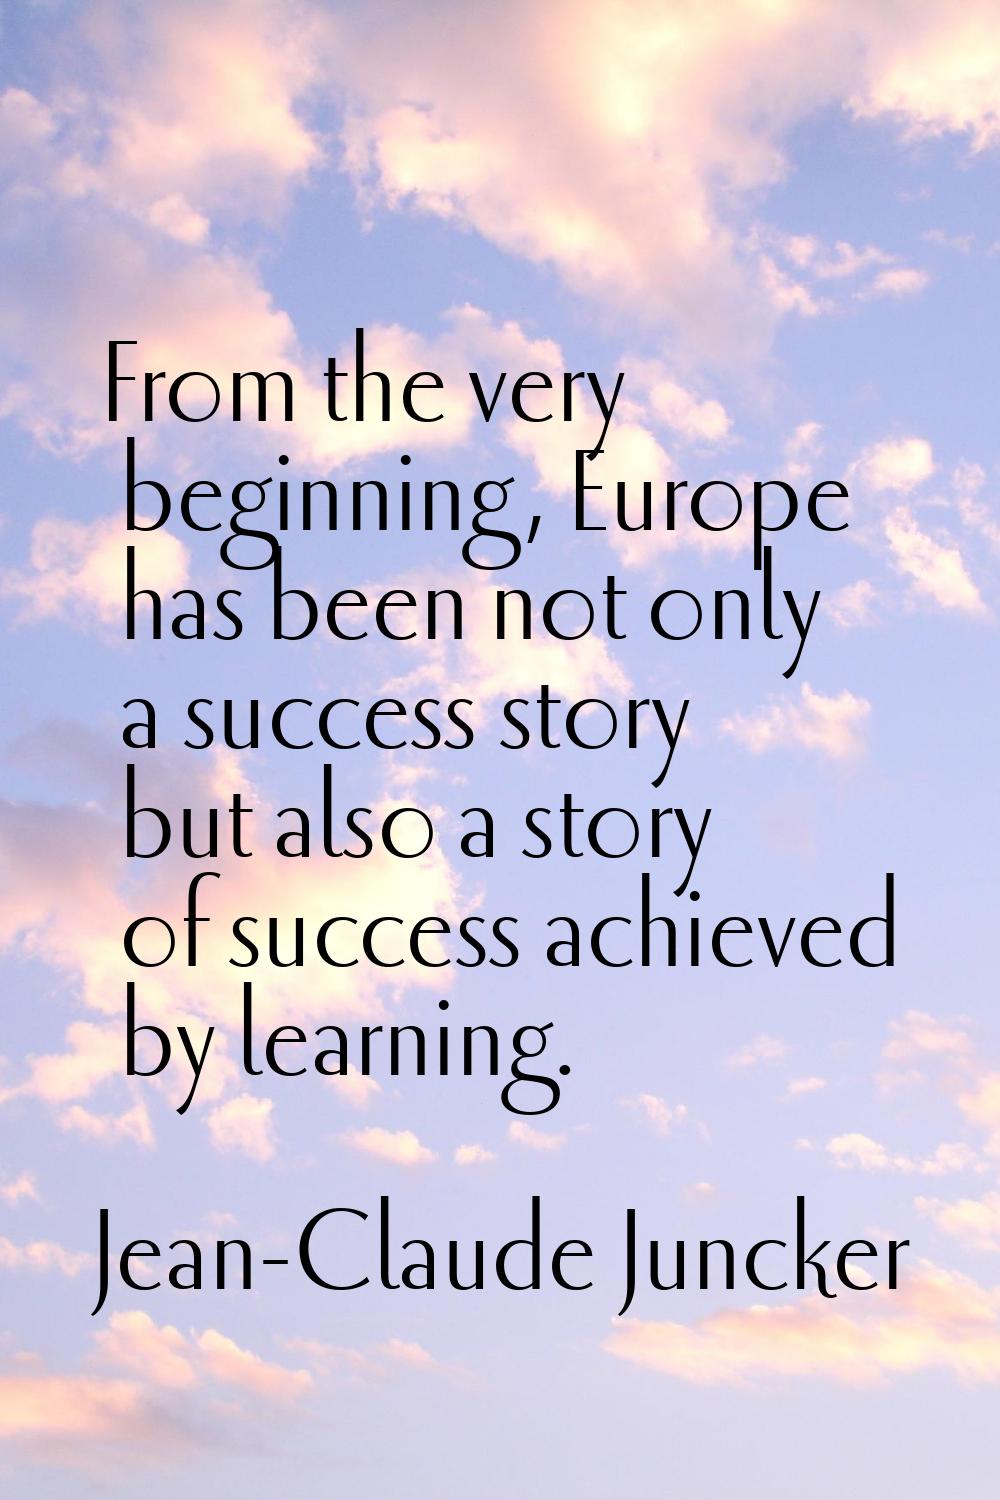 From the very beginning, Europe has been not only a success story but also a story of success achie